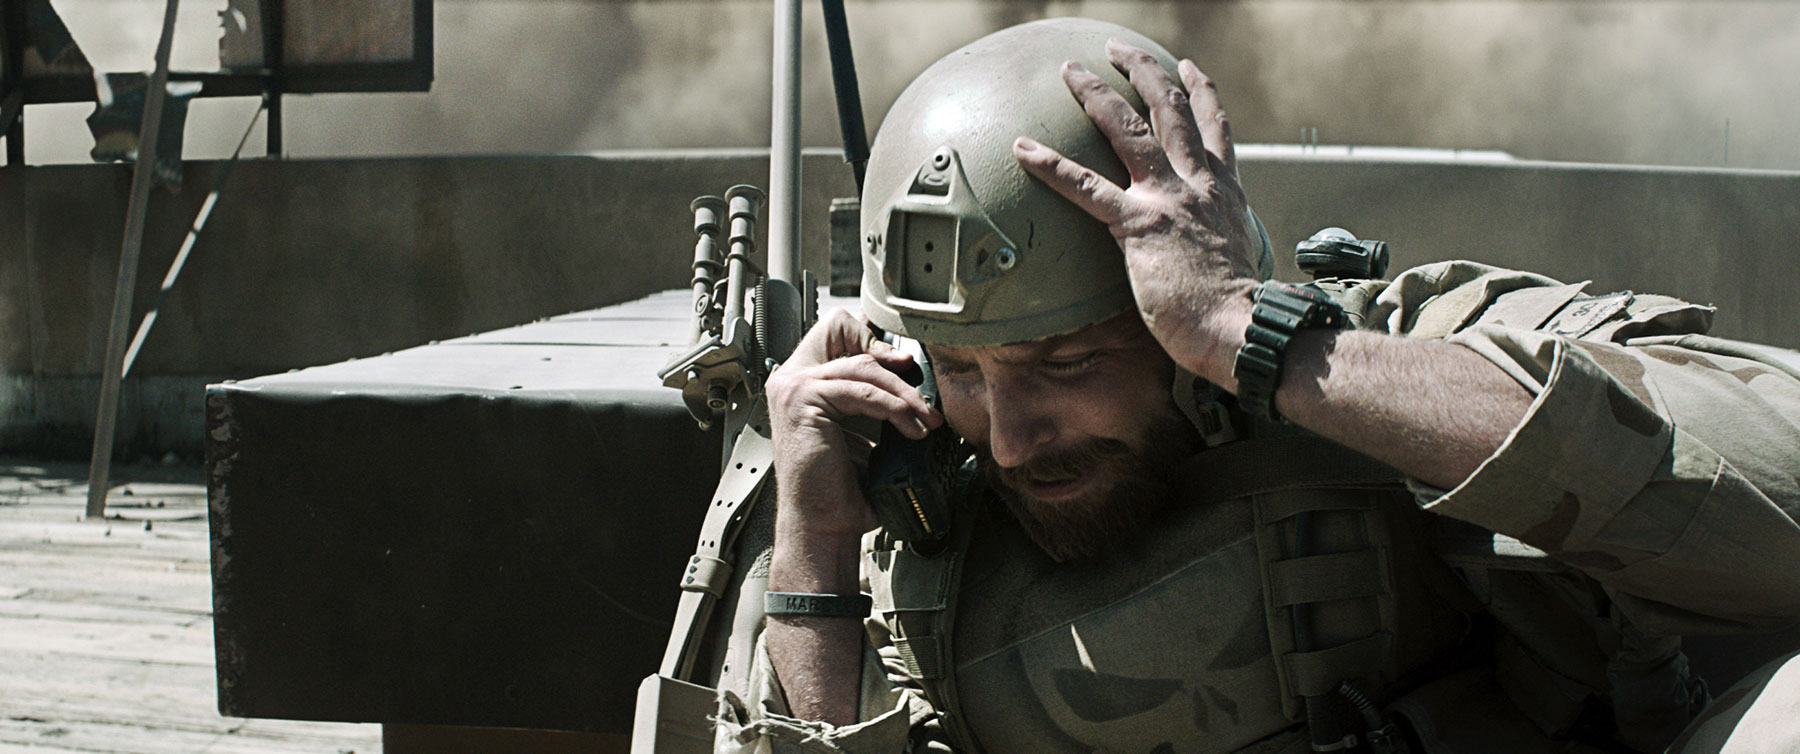 Bradley Cooper as Chris Kyle in Warner Bros. Pictures' and Village Roadshow Pictures' drama "American Sniper." (Photo courtesy Warner Bros. Pictures/TNS)